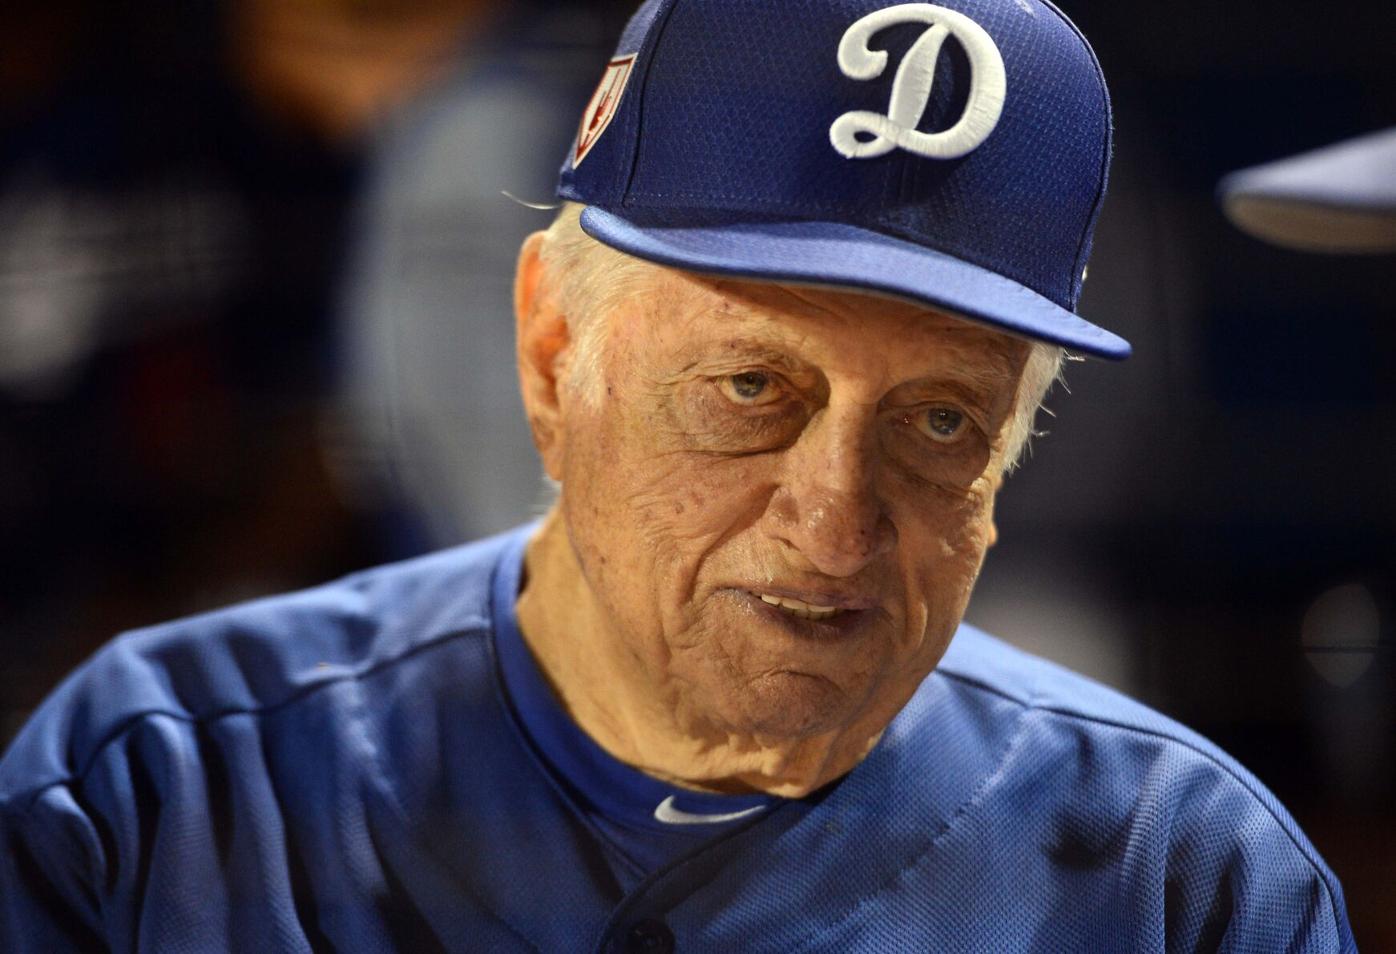 Rick Monday shares a Tommy Lasorda story, discusses college days